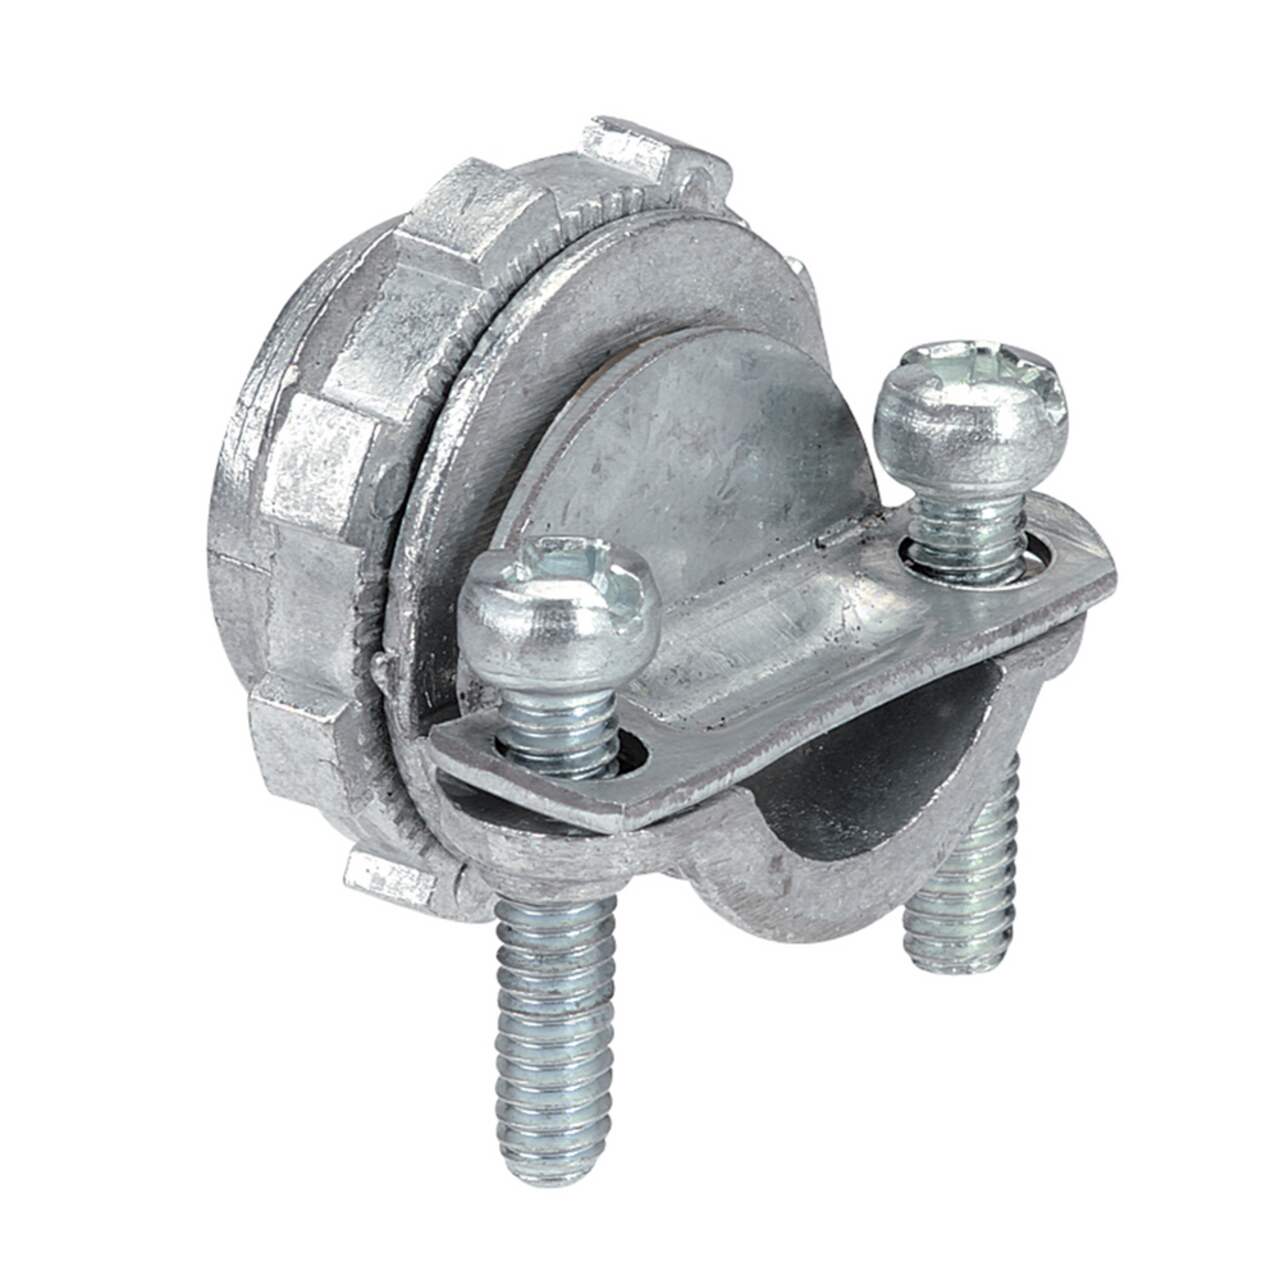 https://media-www.canadiantire.ca/product/fixing/electrical/rough-electrical/0521831/connector-straight-2-screw-5264f1fe-d118-411b-b363-40bc62f9a54f.png?imdensity=1&imwidth=640&impolicy=mZoom